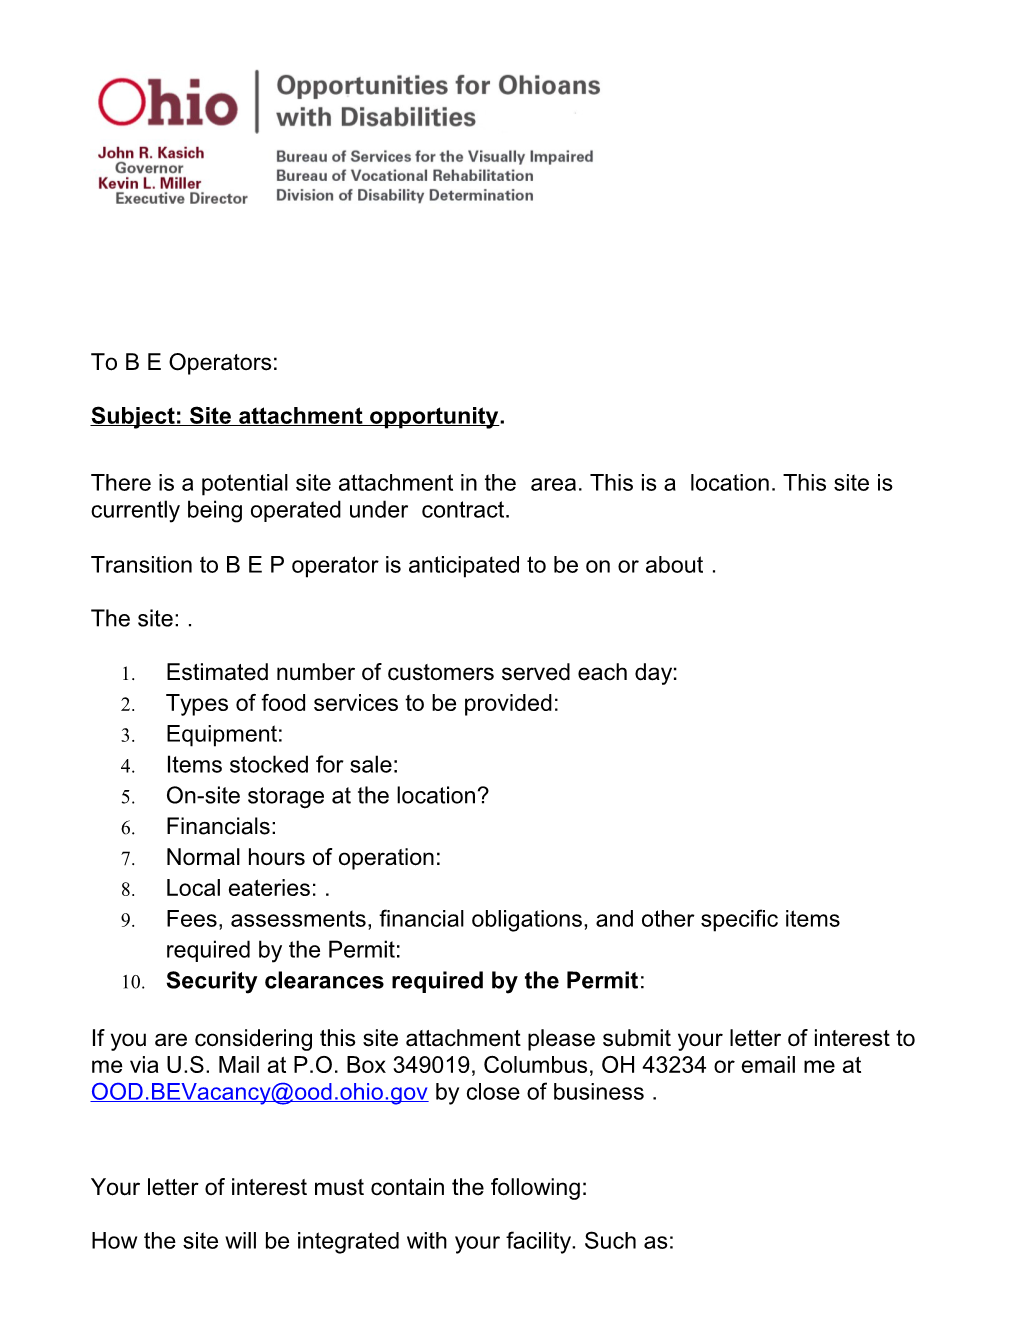 Subject: Site Attachment Opportunity